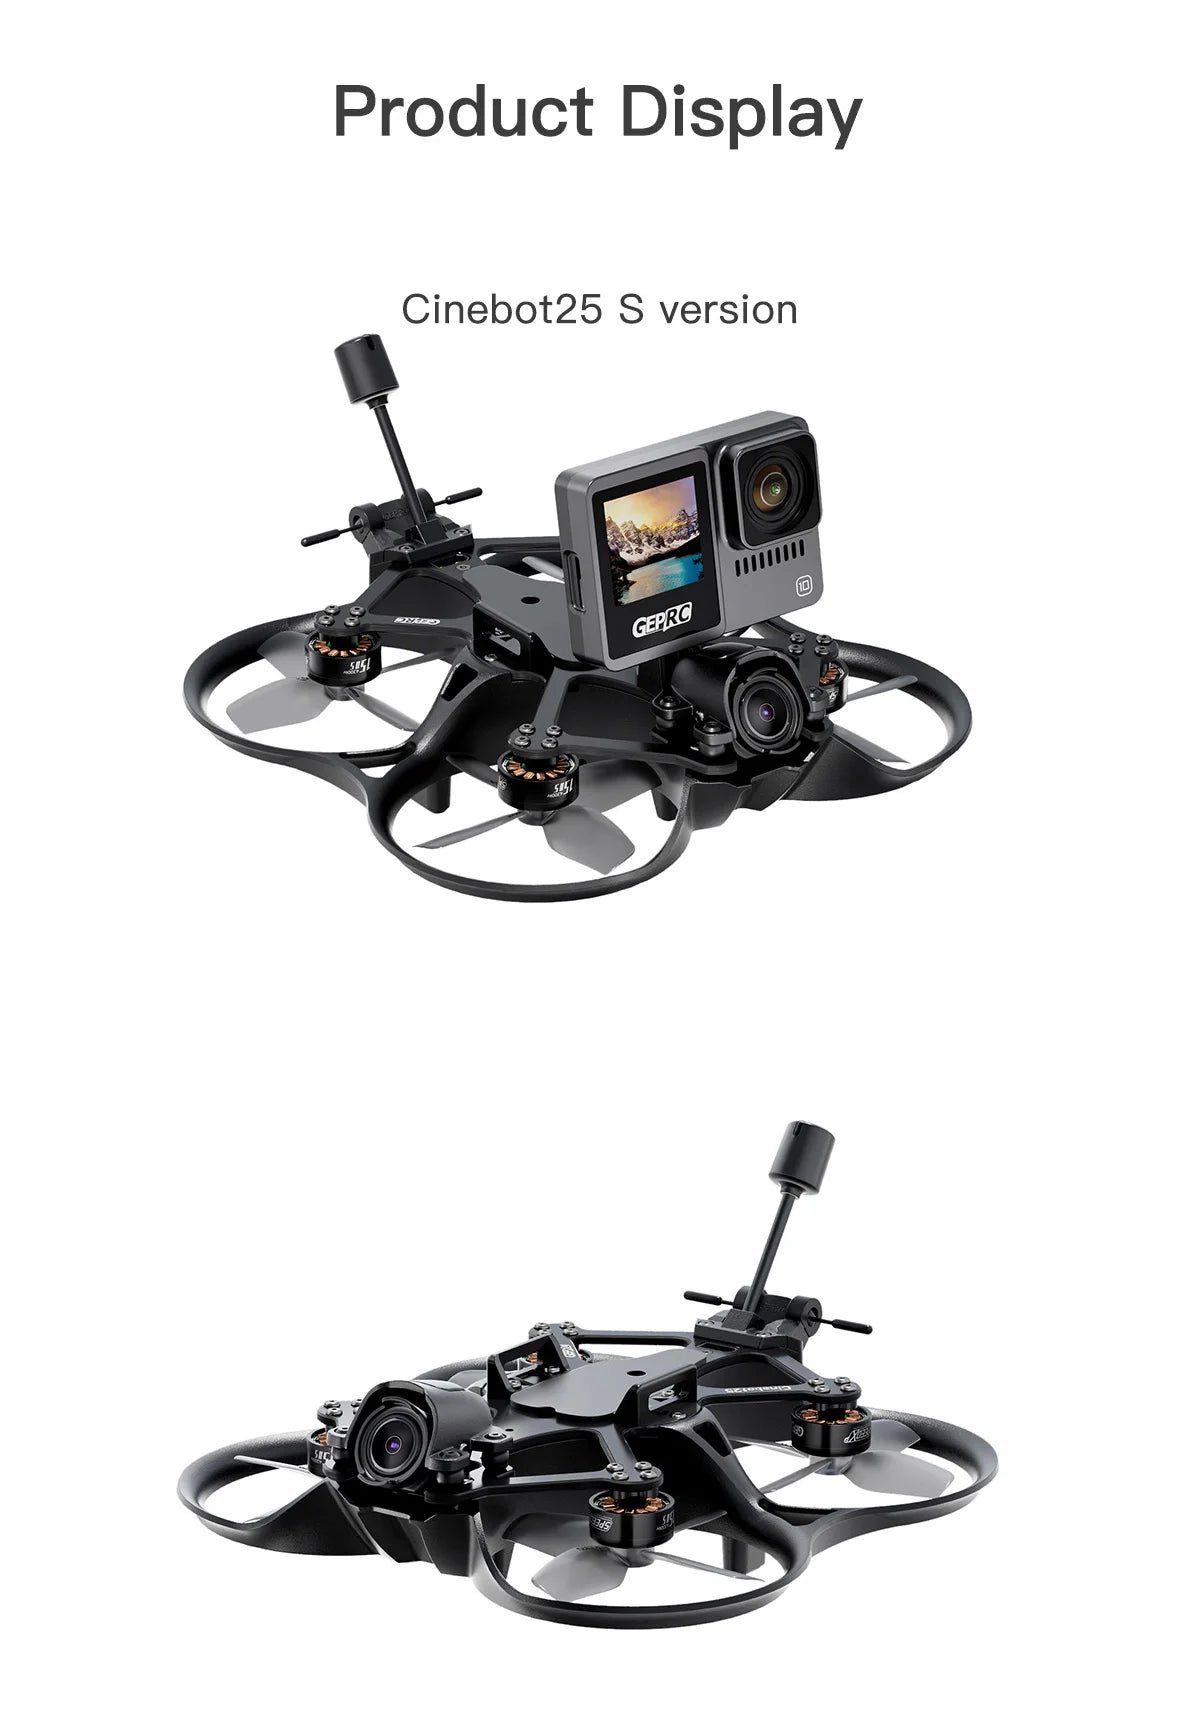 GEPRC Cinebot25 S HD Wasp FPV Drone, GEPRO Cinebot25 S version S451 